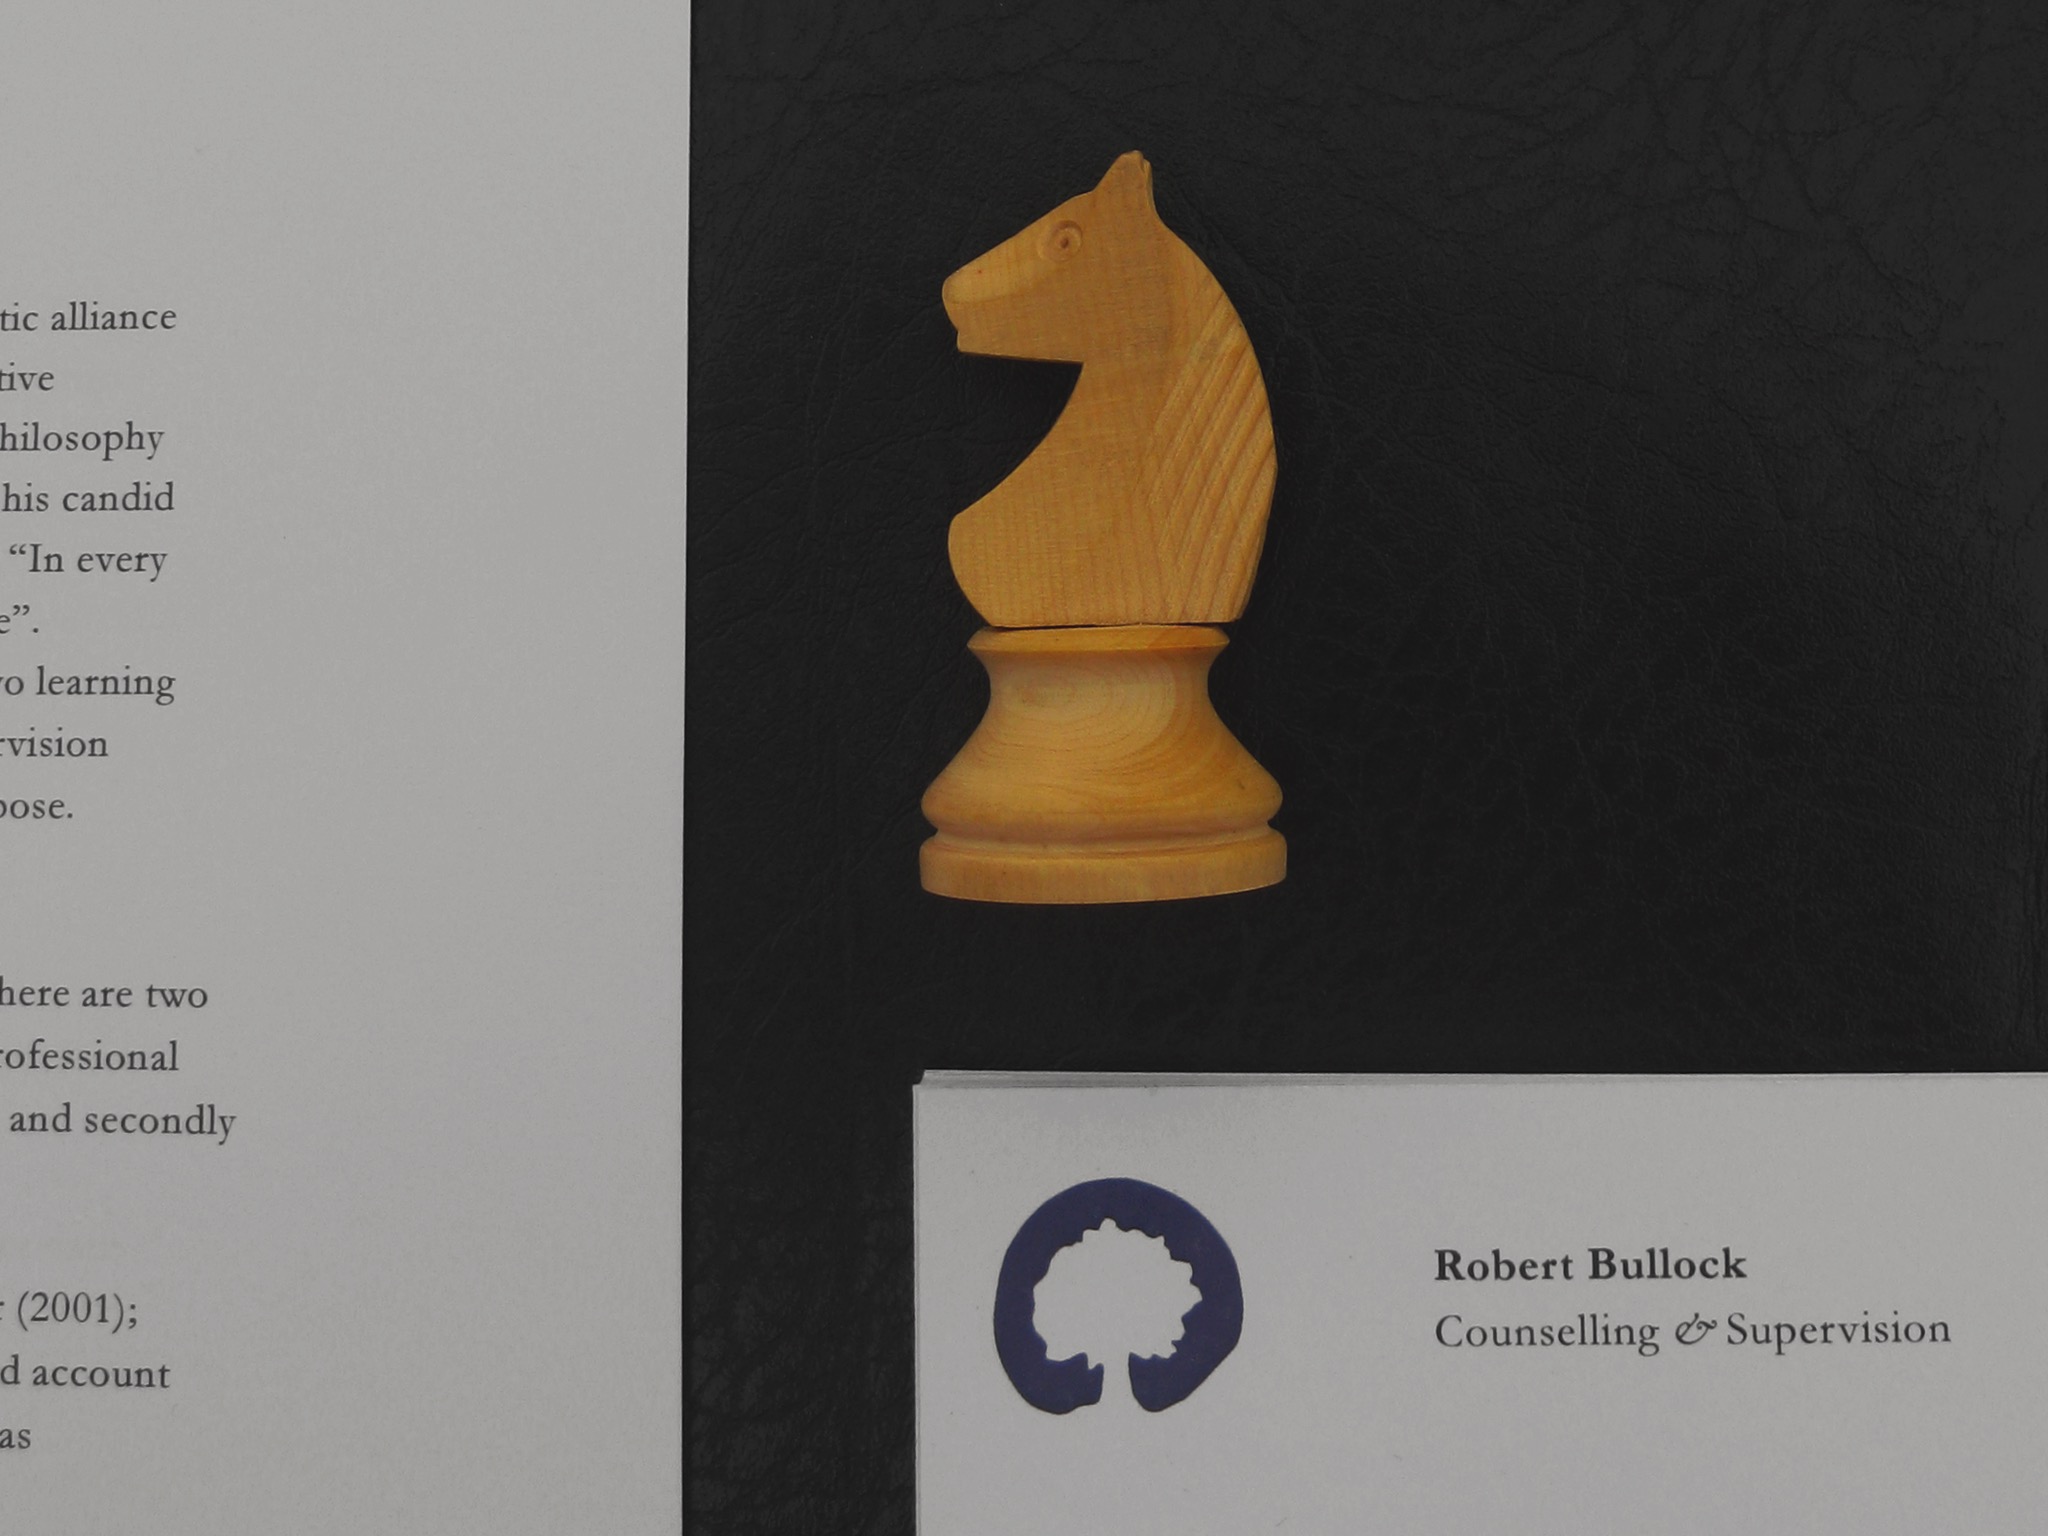 Robert Bullock Counselling & Supervision